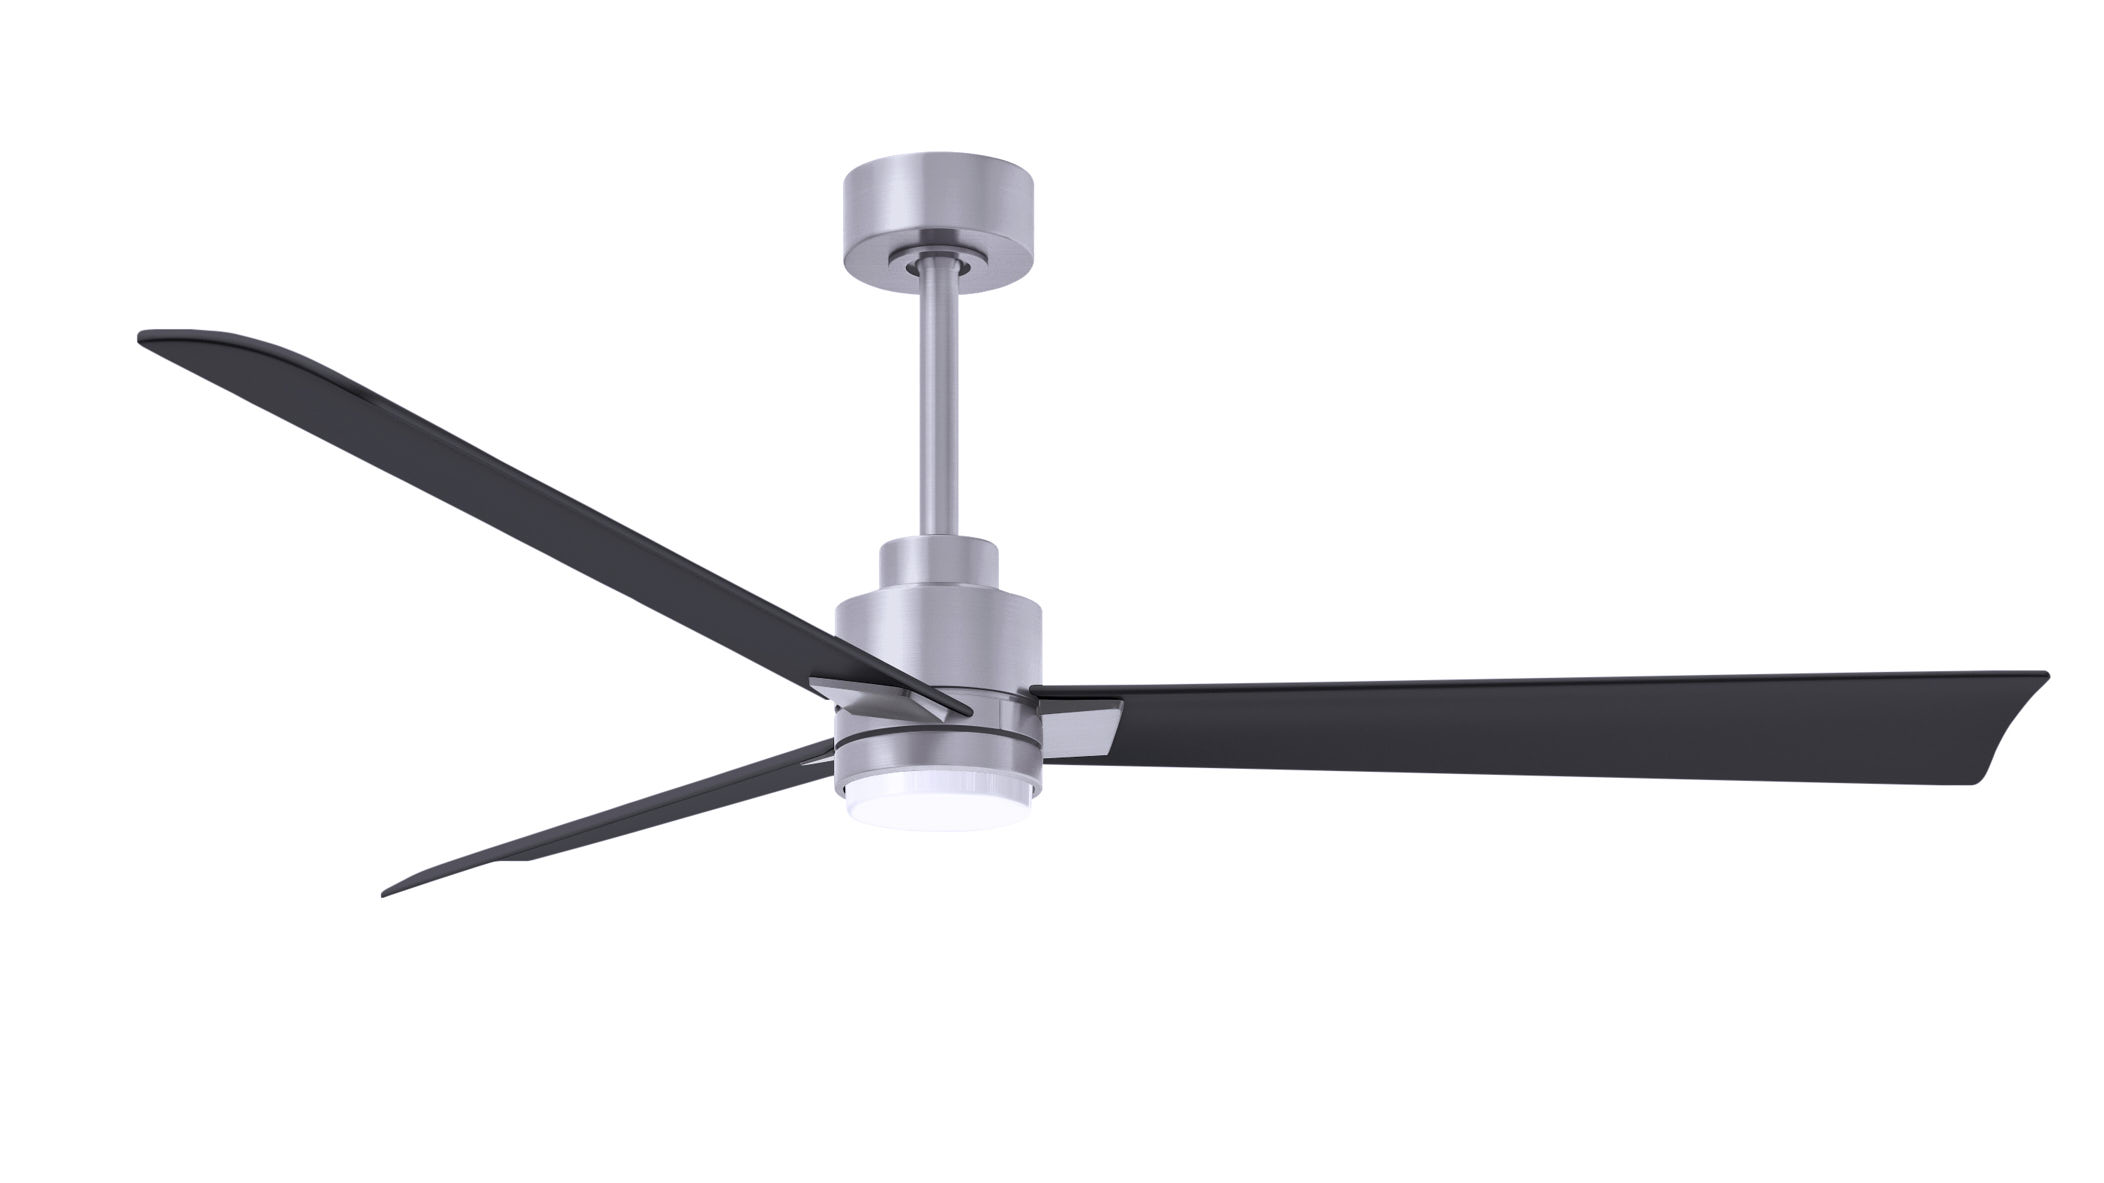 Alessandra-LK ceiling fan in brushed nickel finish with 56